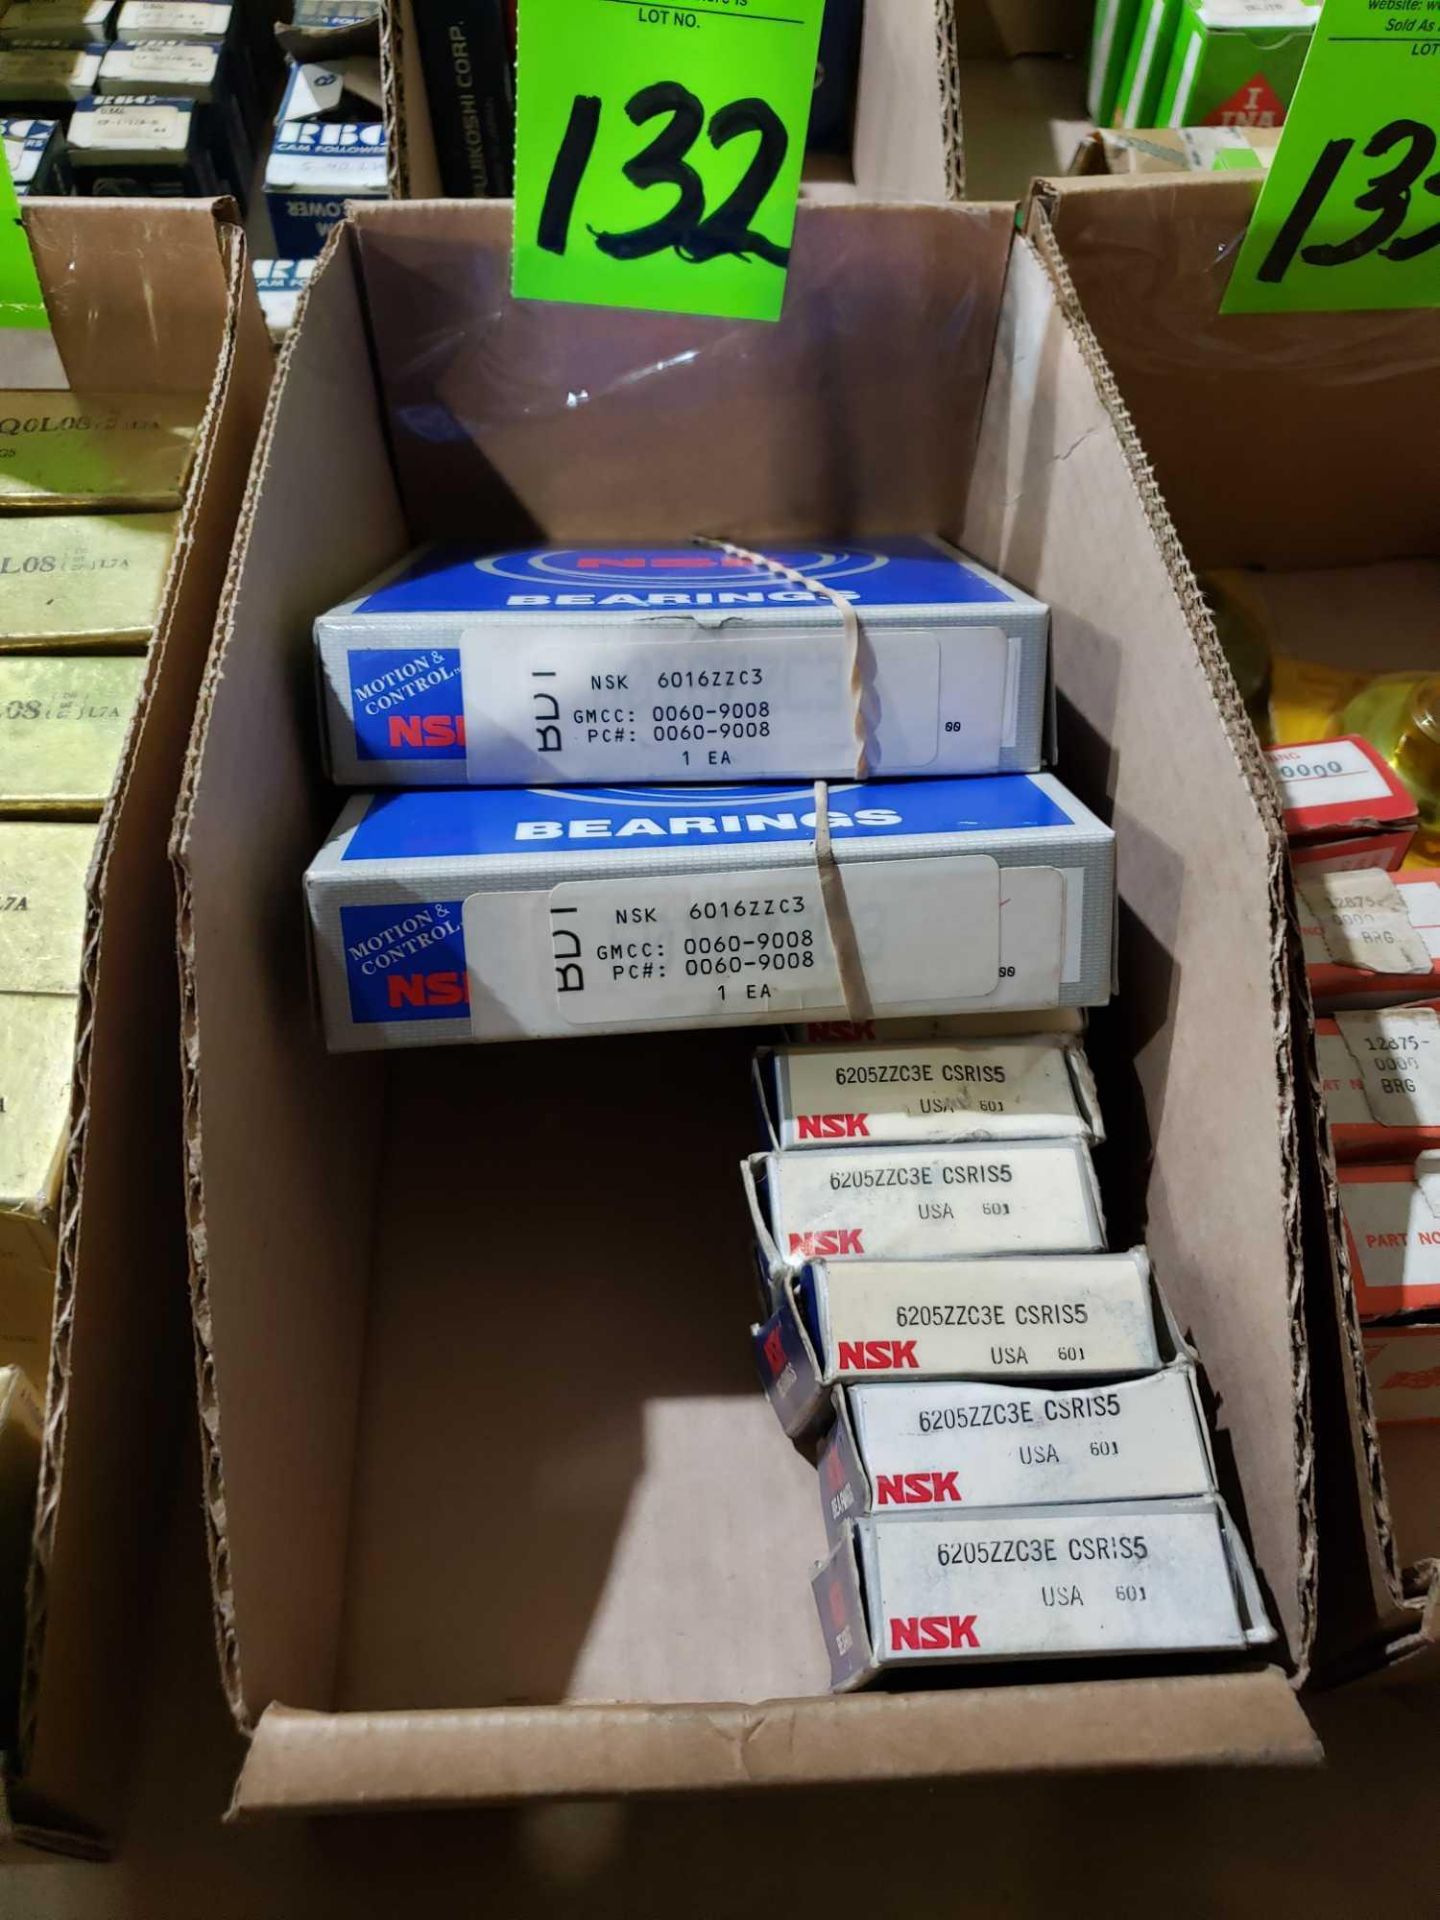 Qty 7- NSK bearings, assorted part numbers. New in boxes as pictured.